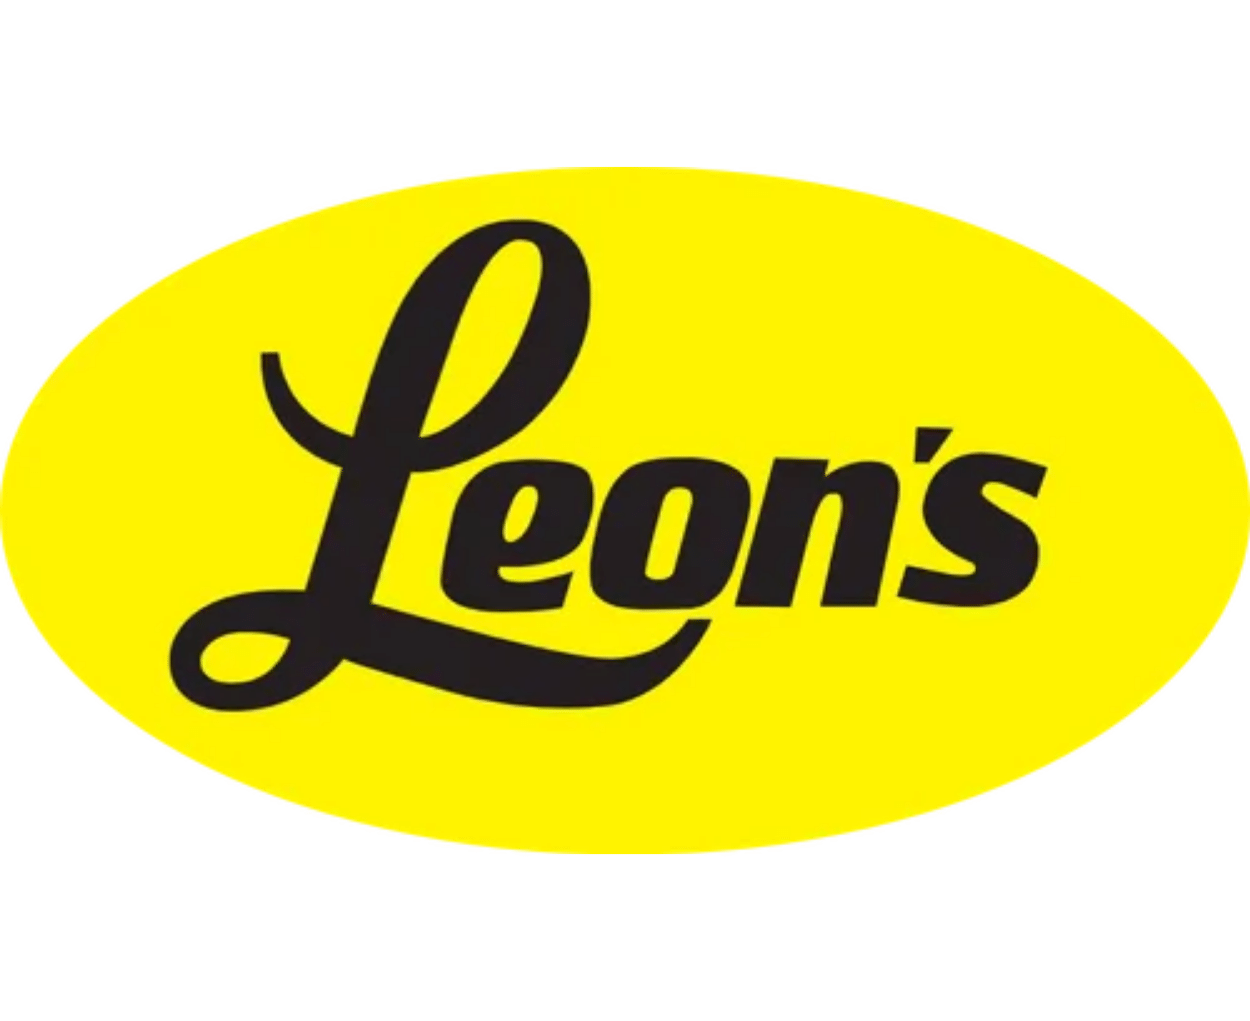 The image shows the logo of "leon's" with stylized cursive text on an oval, yellow background, signifying their last mile delivery tracking service.